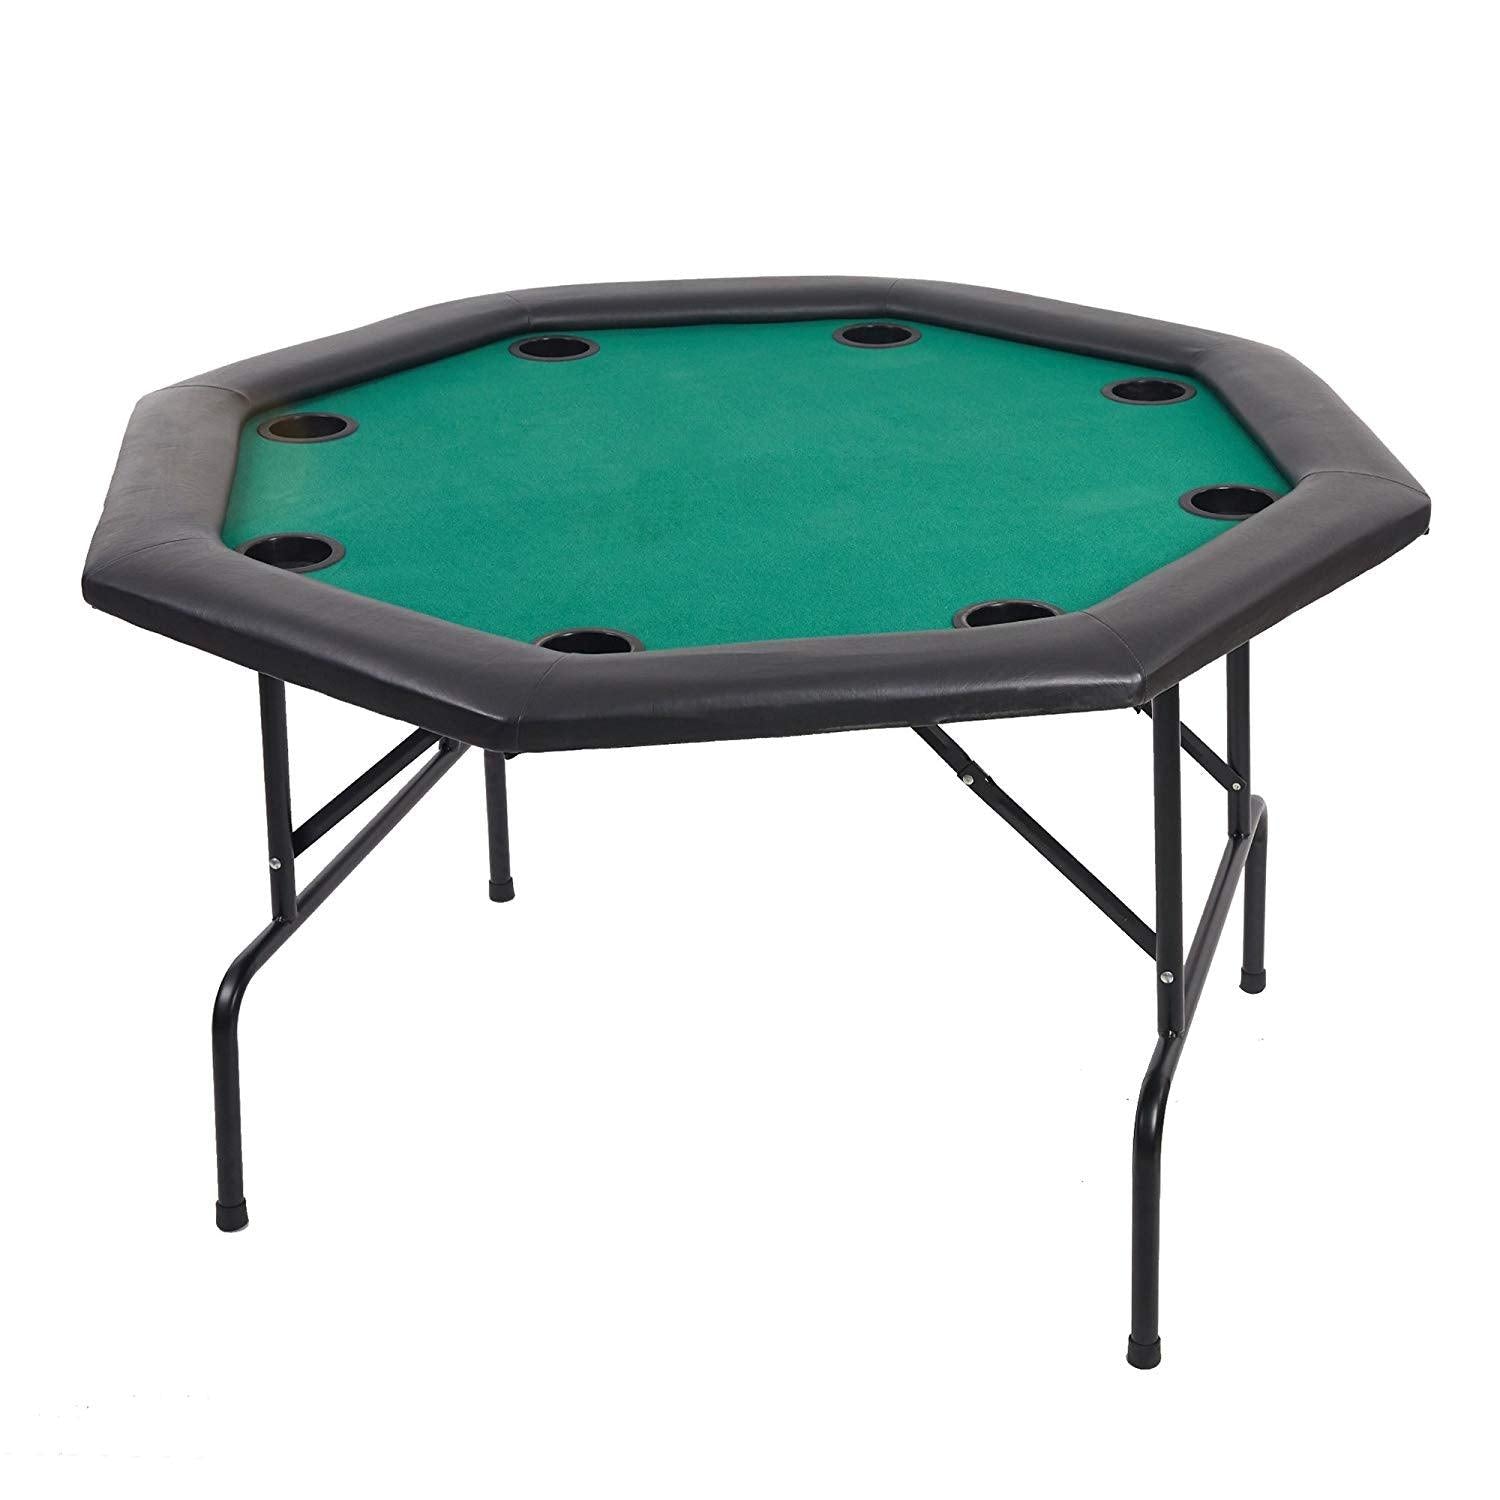 Bosonshop 48” Octagon Folding Poker Table Folding Steel Legs and Cup Holders Forest Green